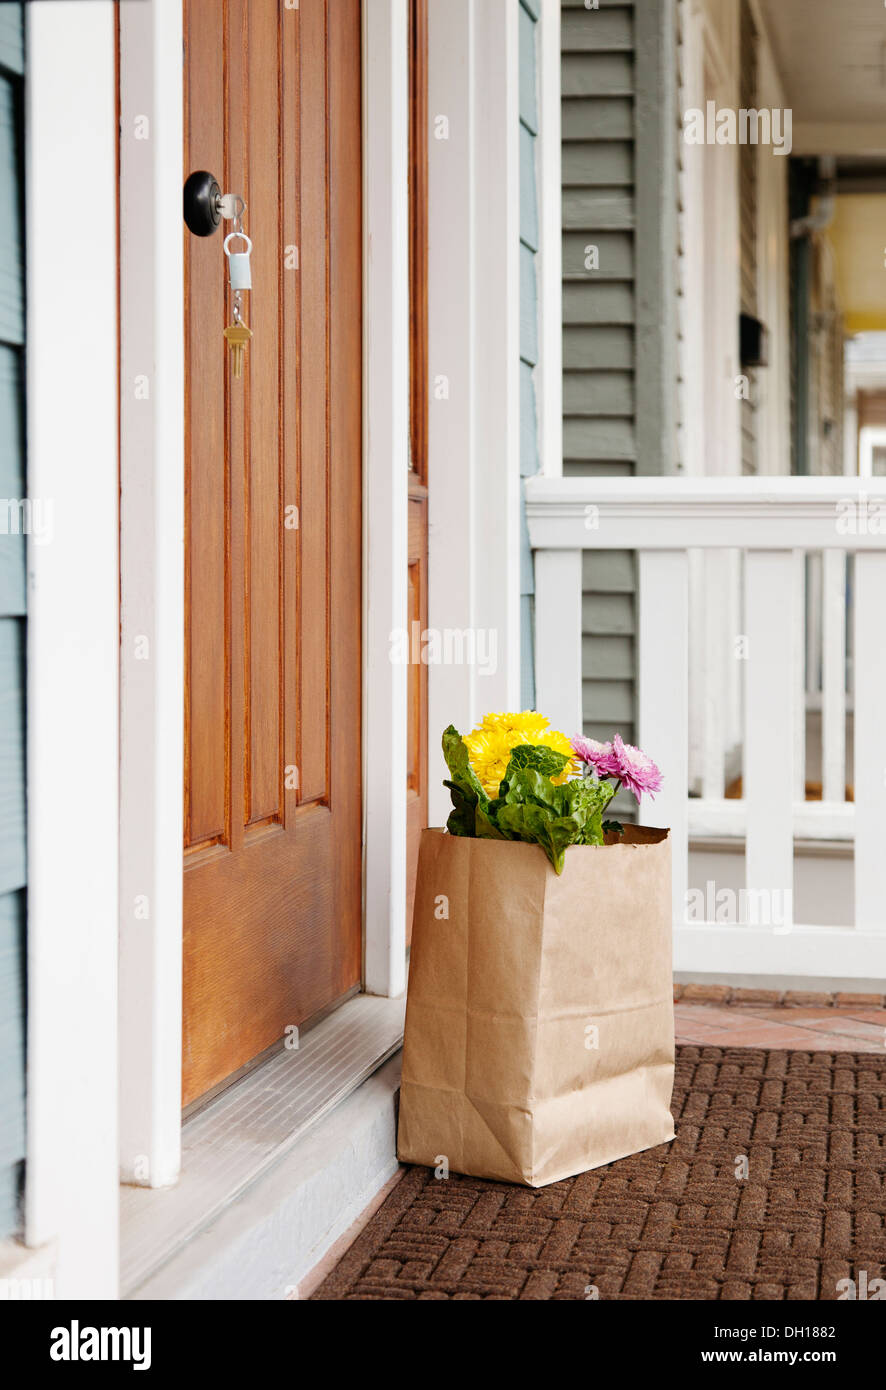 Grocery bag on front stoop Stock Photo